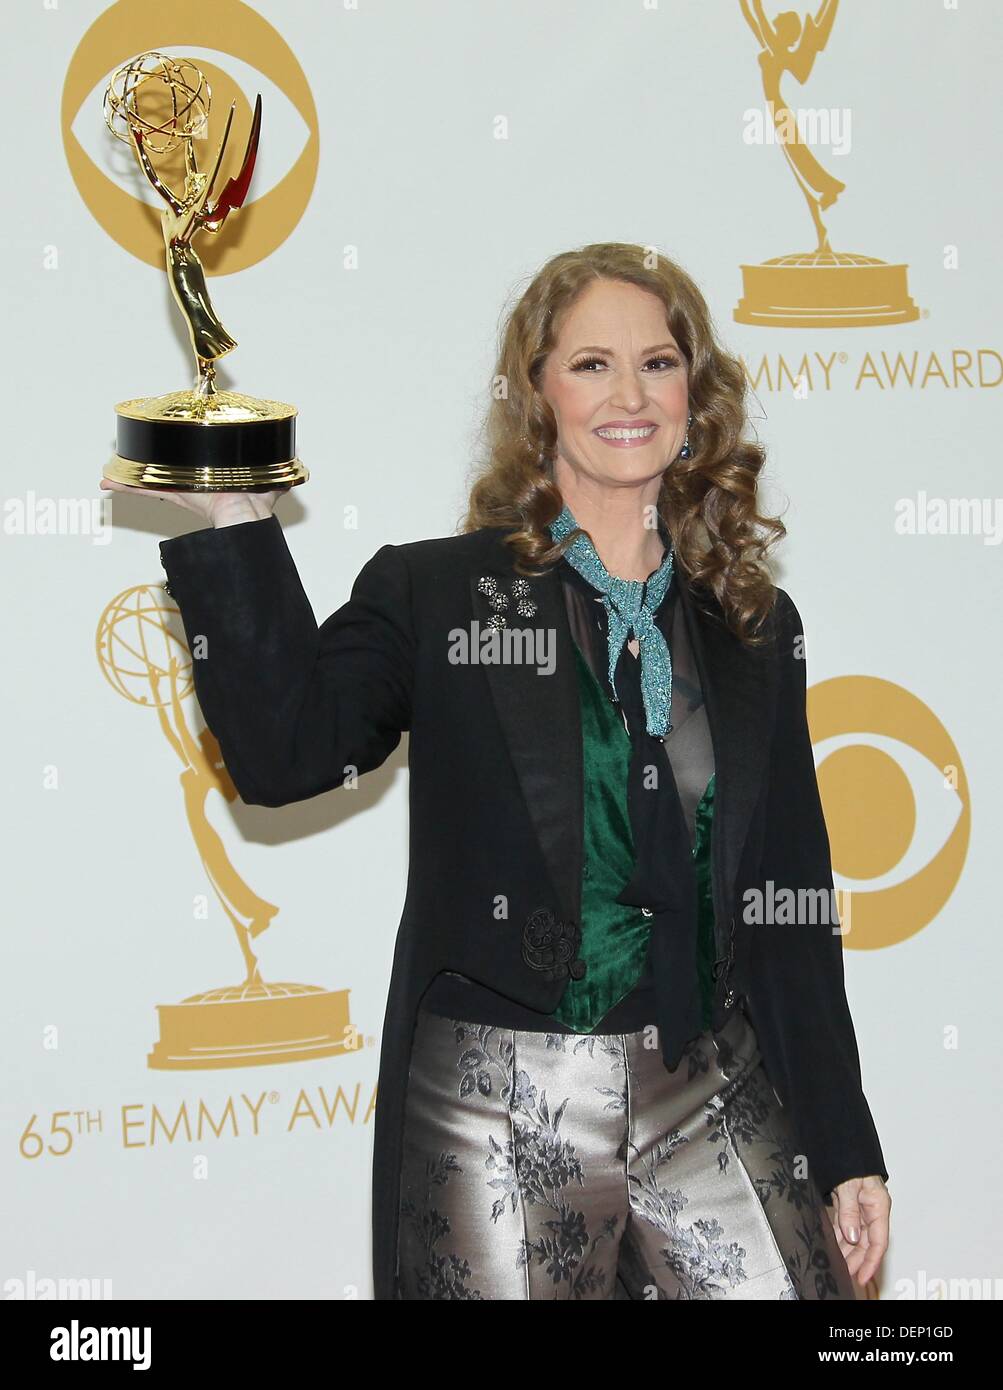 Melissa leo louie hi-res stock photography and images - Alamy